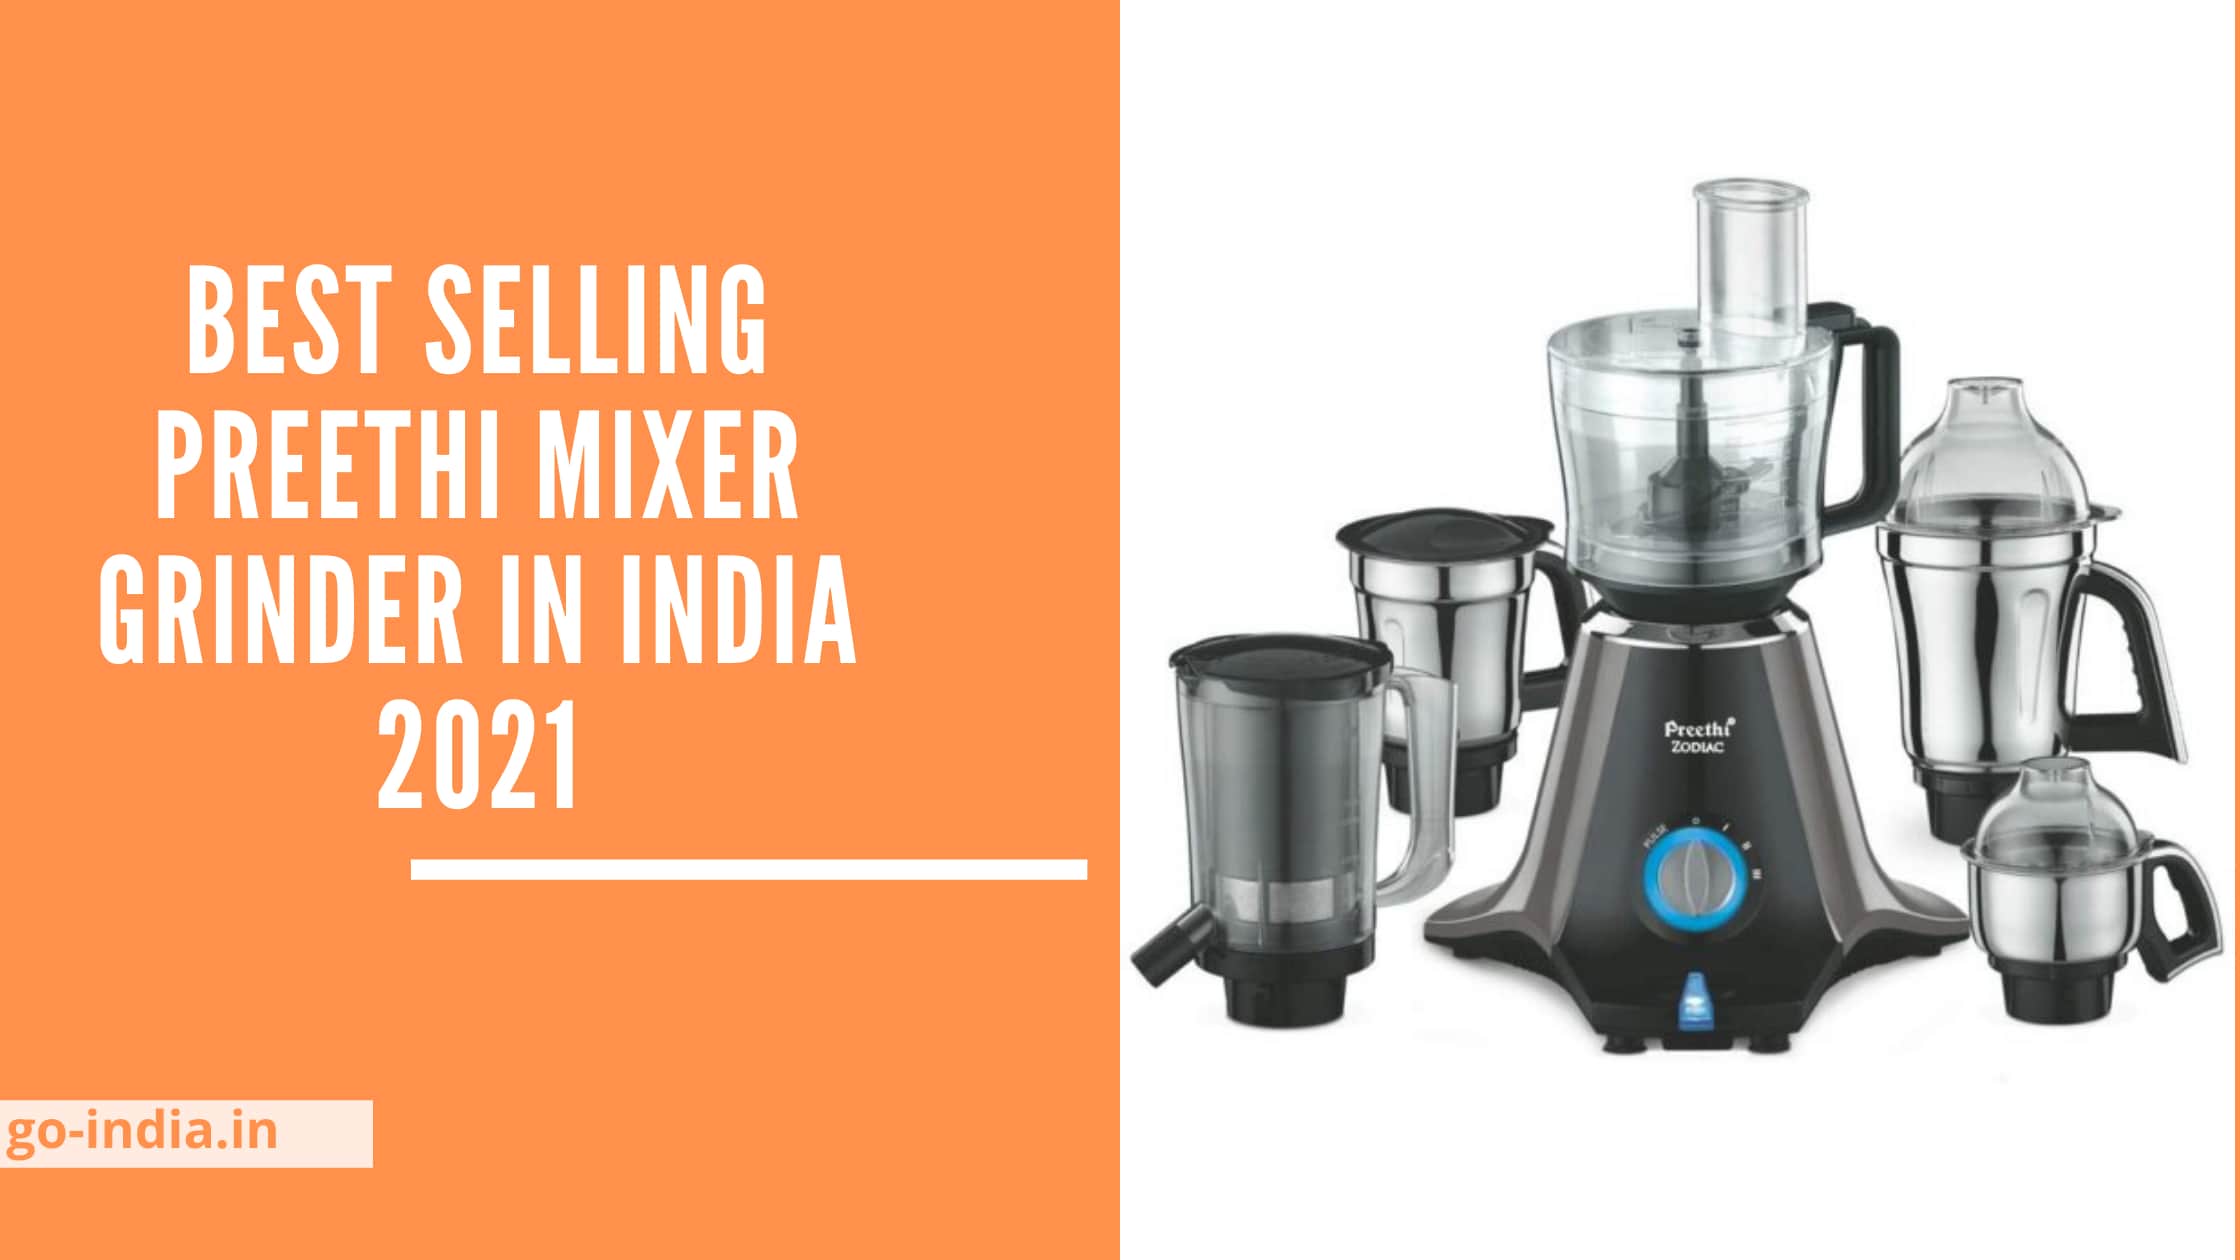 10 Best Selling Preethi Mixer Grinder in India